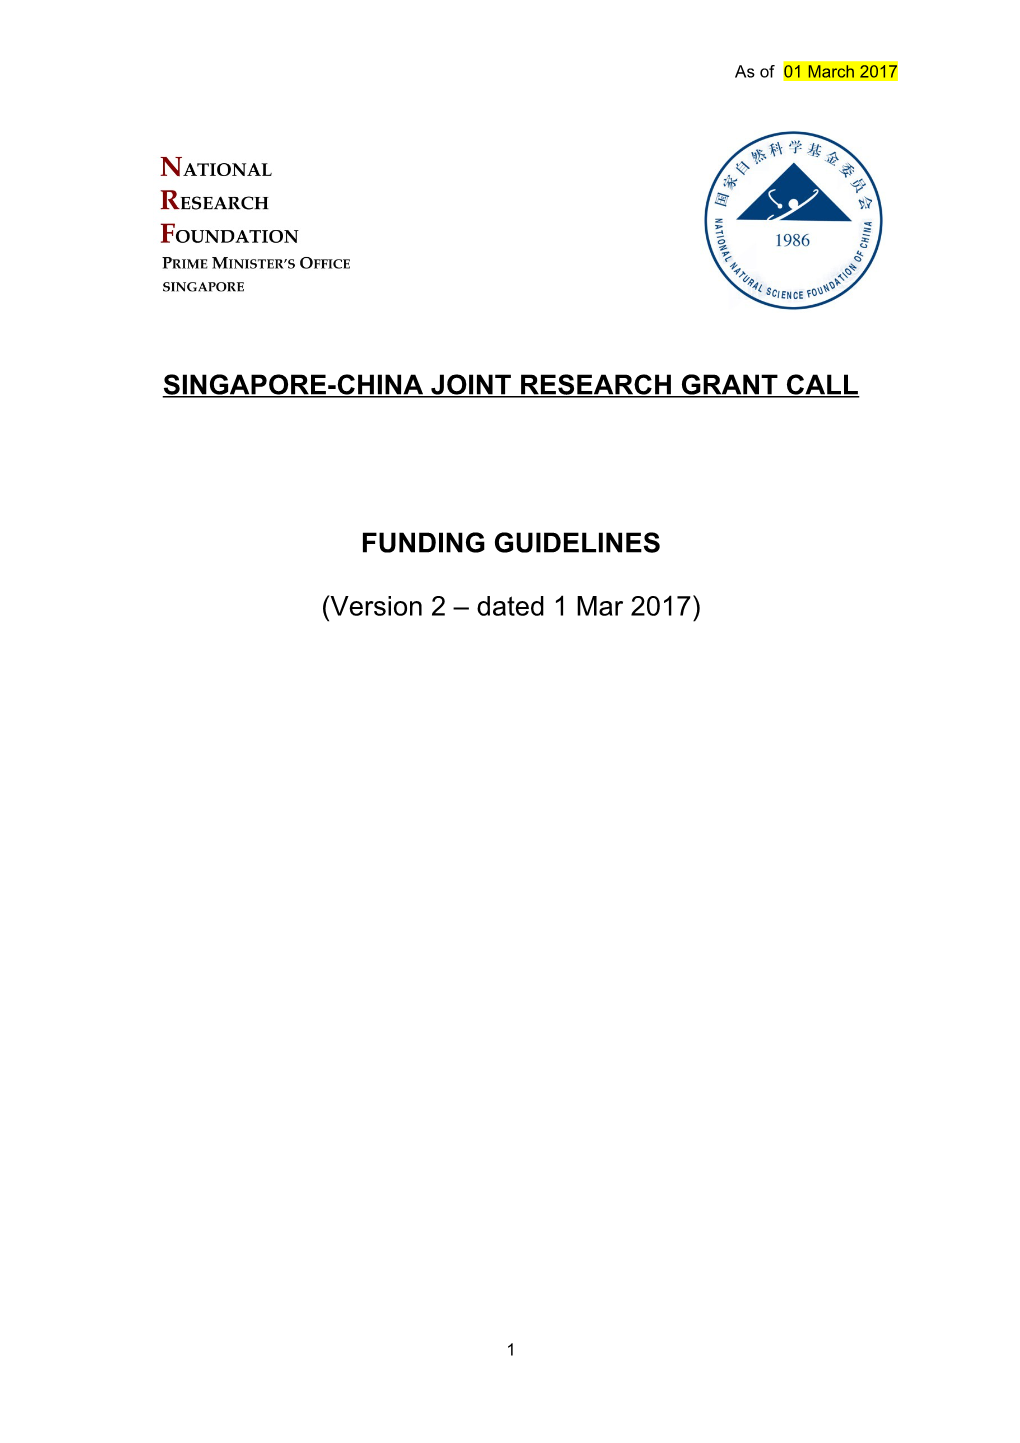 Singapore-China Joint Research Grant Call